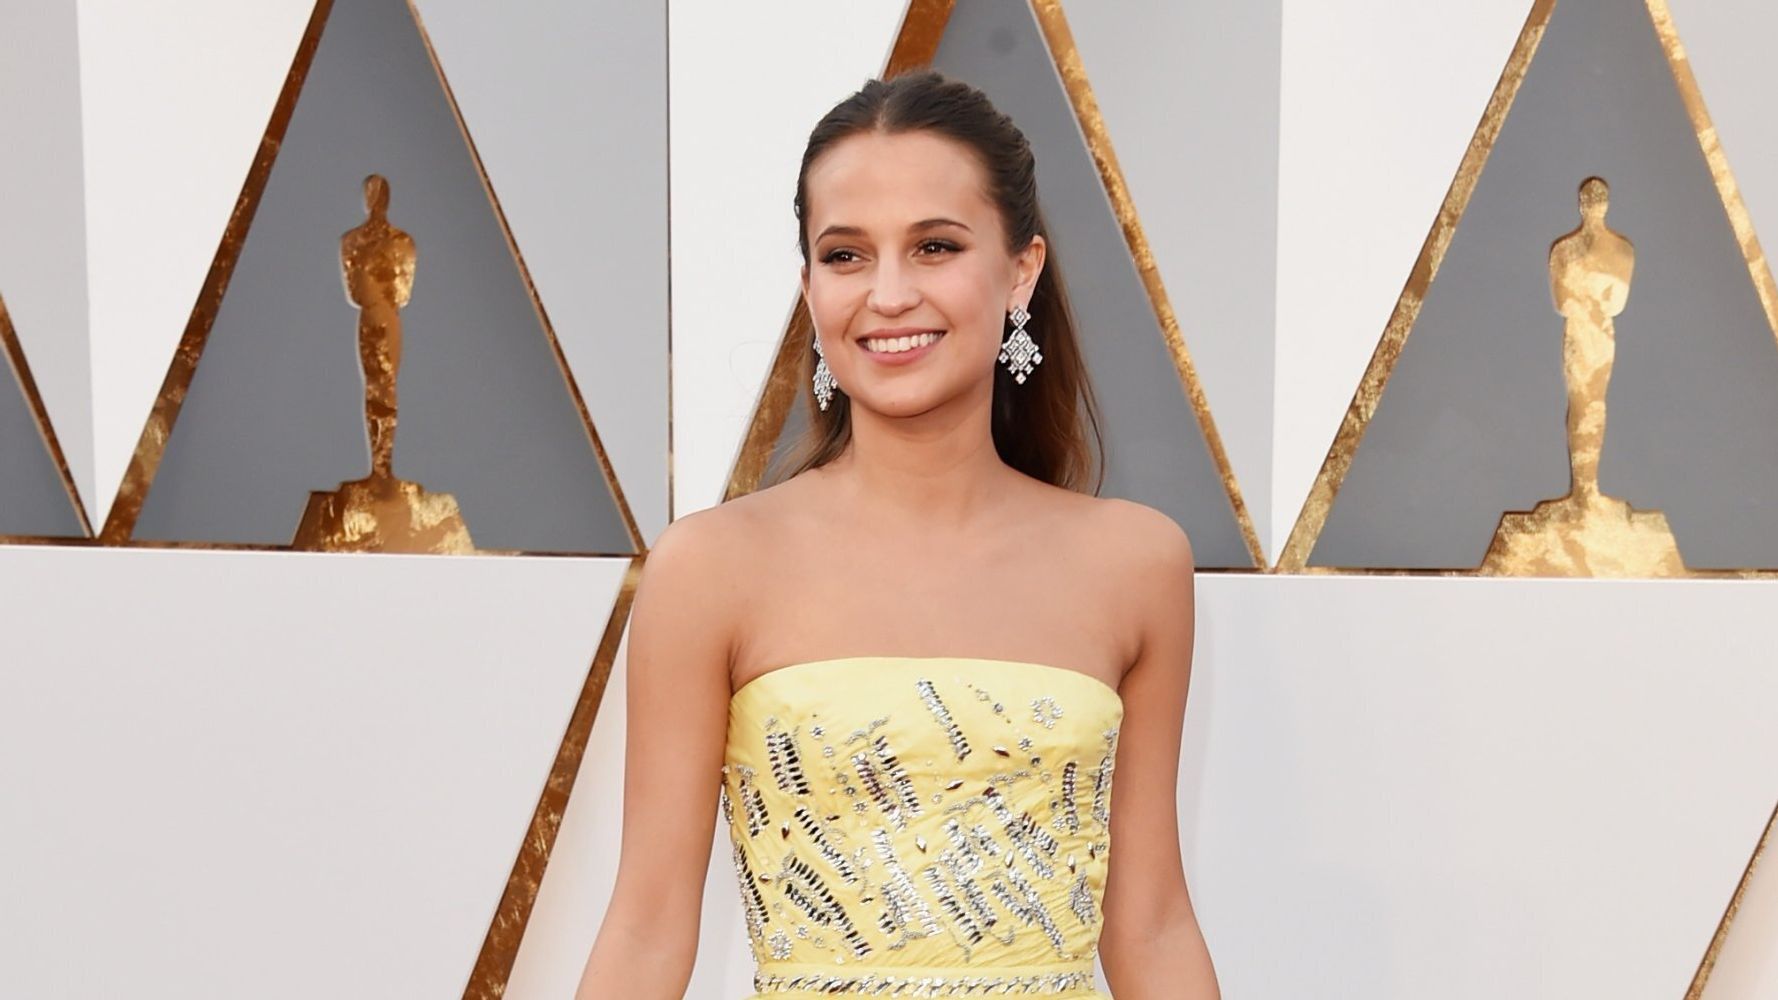 Alicia Vikander on stage at the 2016 Oscars wearing Louis Vuitton